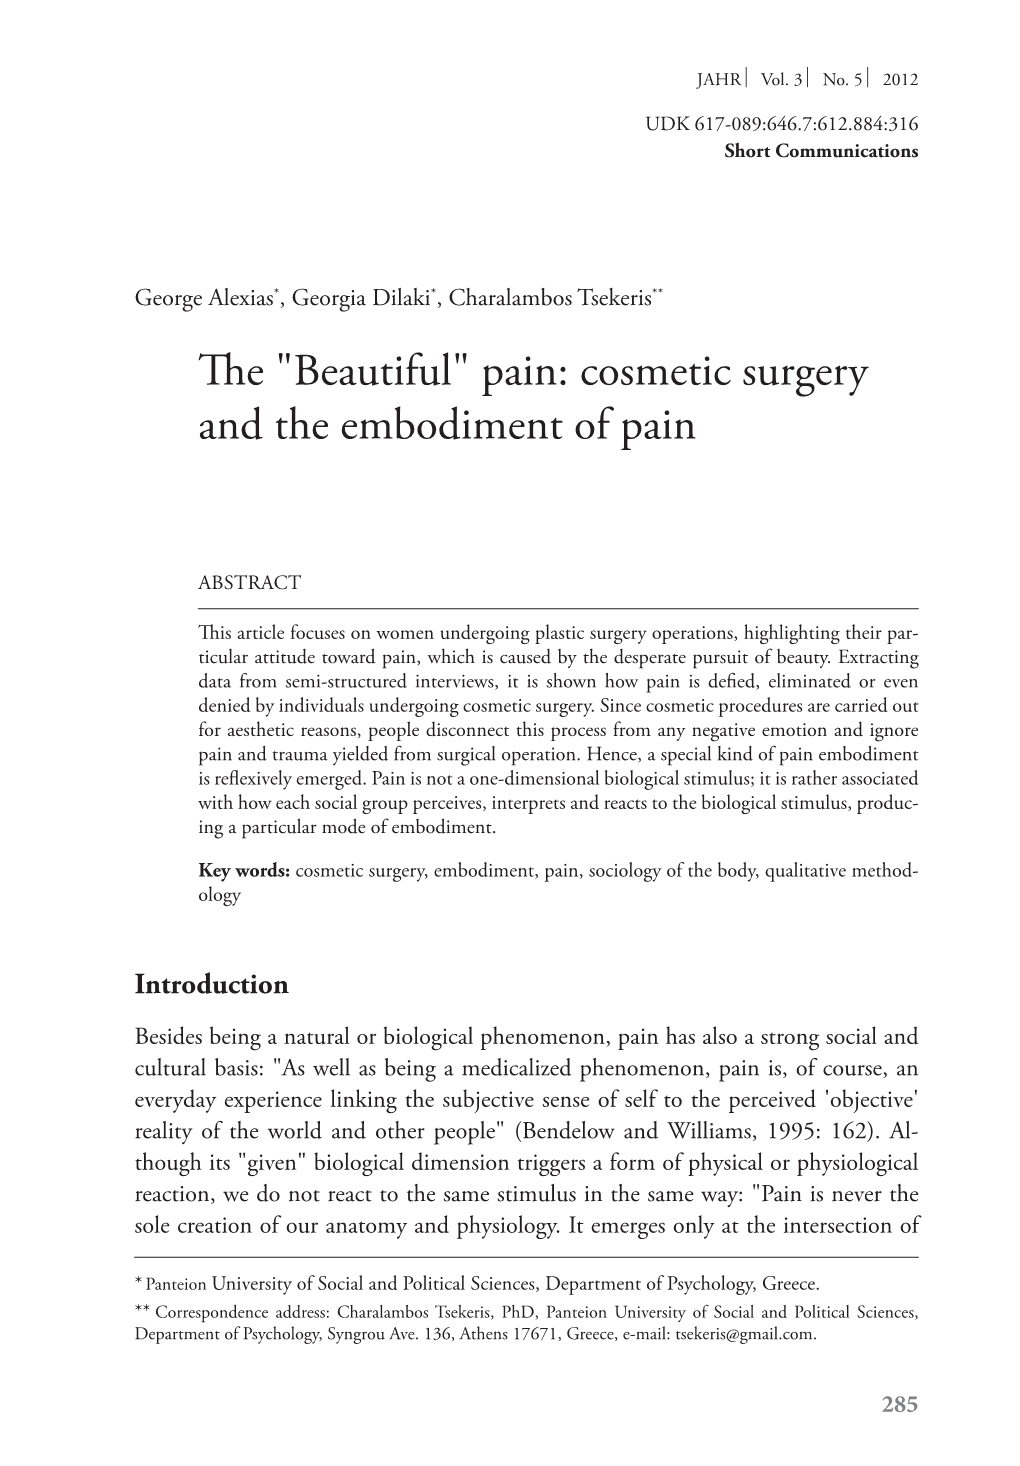 The "Beautiful" Pain: Cosmetic Surgery and the Embodiment of Pain